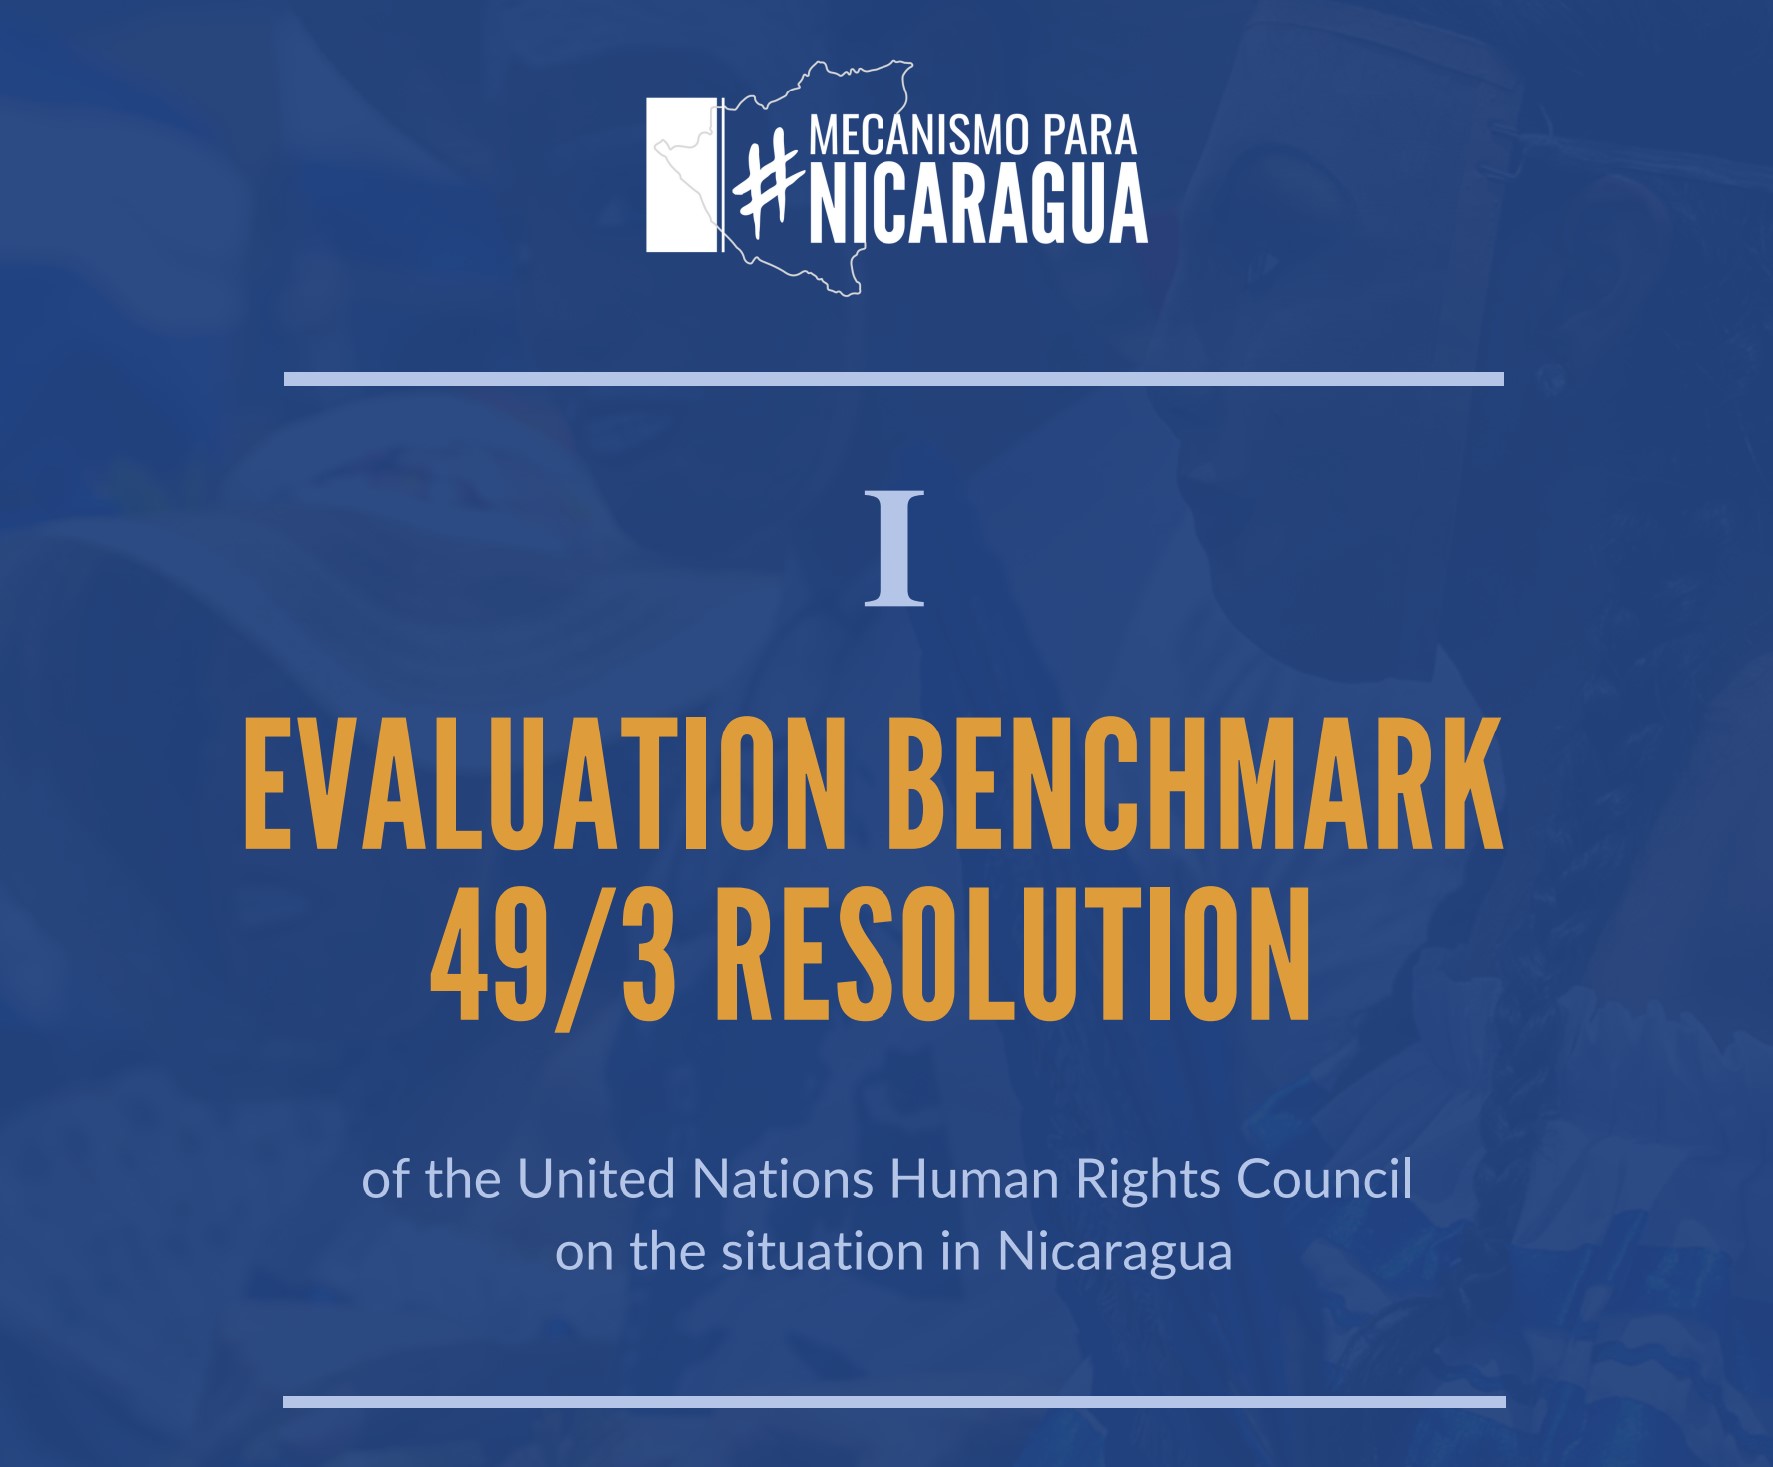 Screenshot of the cover of the report containing the evaluation benchmark of Nicaragua's compliance with resolution 49/3 of the HRC